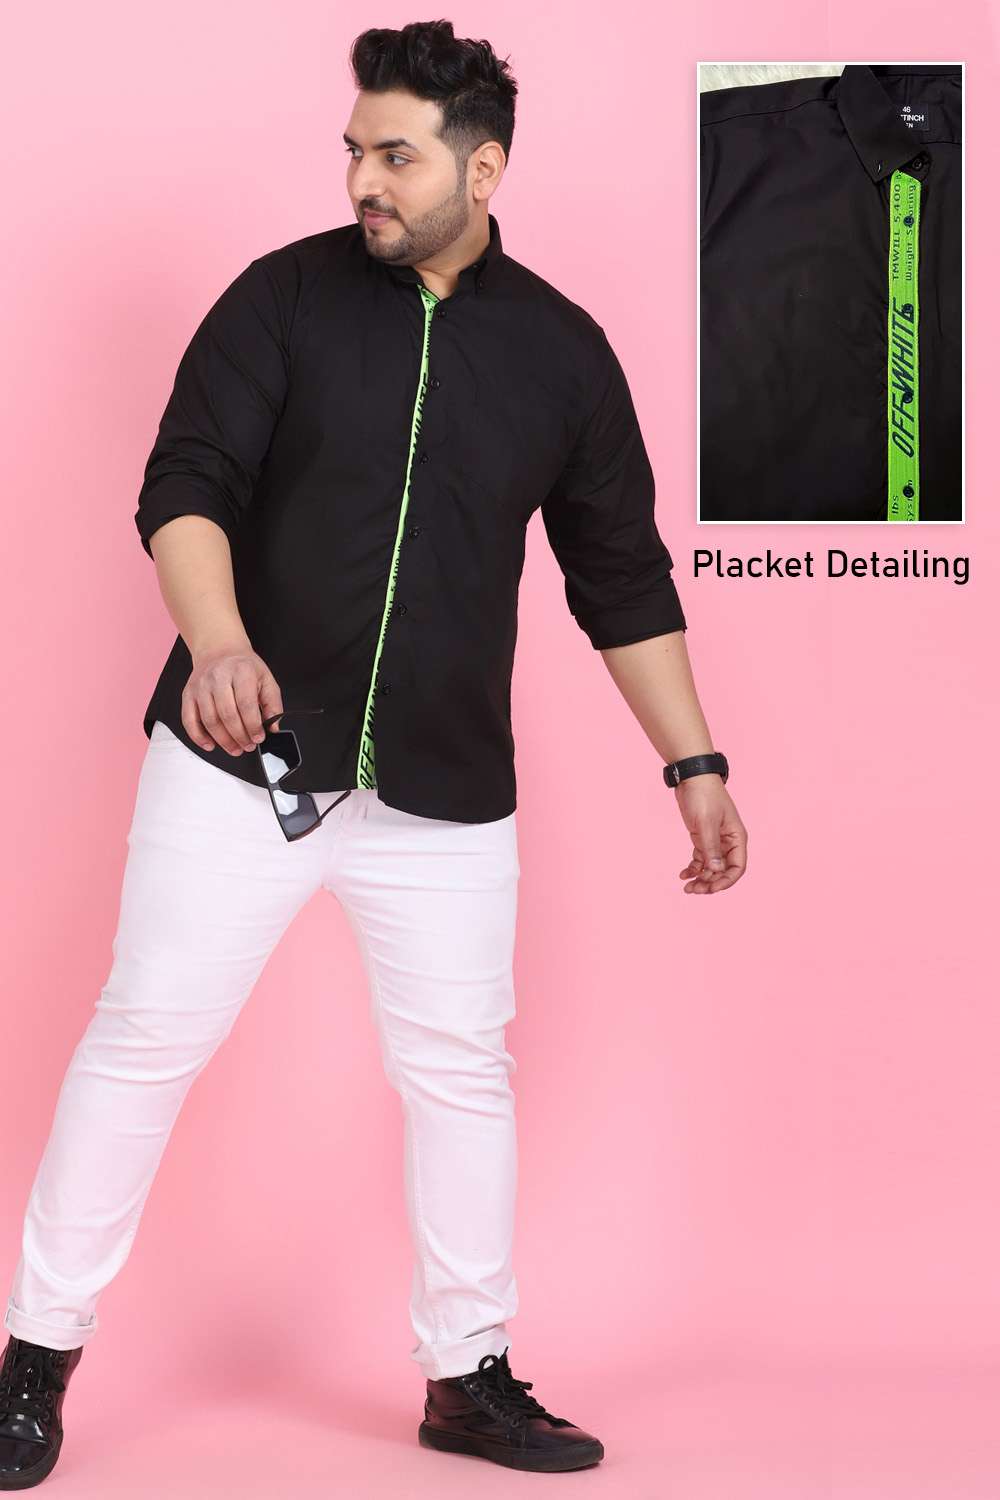 Lastinch Online Store - Buy Lastinch Products Online in India - Myntra